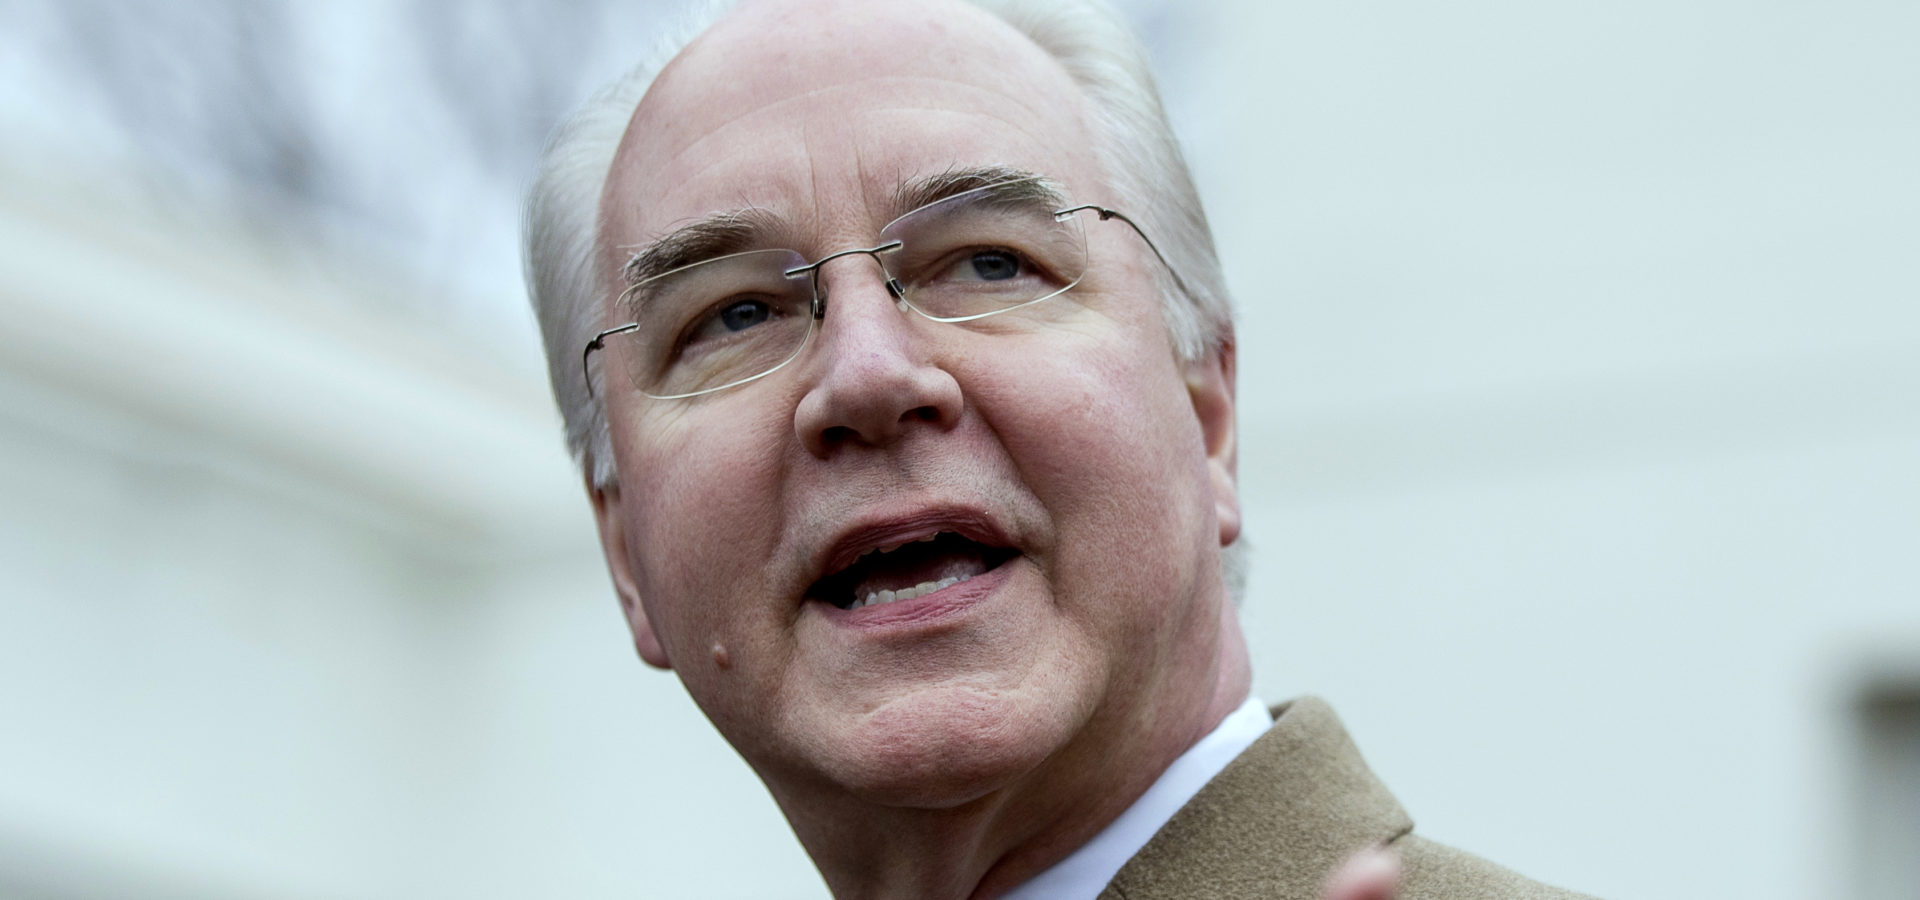 Health and Human Services Secretary Tom Price speaks outside the West Wing of the White House in Washington, Monday, March 13, 2017, after Congress' nonpartisan budget analysts reported that millions people would lose coverage next year under the House bill dismantling former President Barack Obama's health care law. (AP/Andrew Harnik)